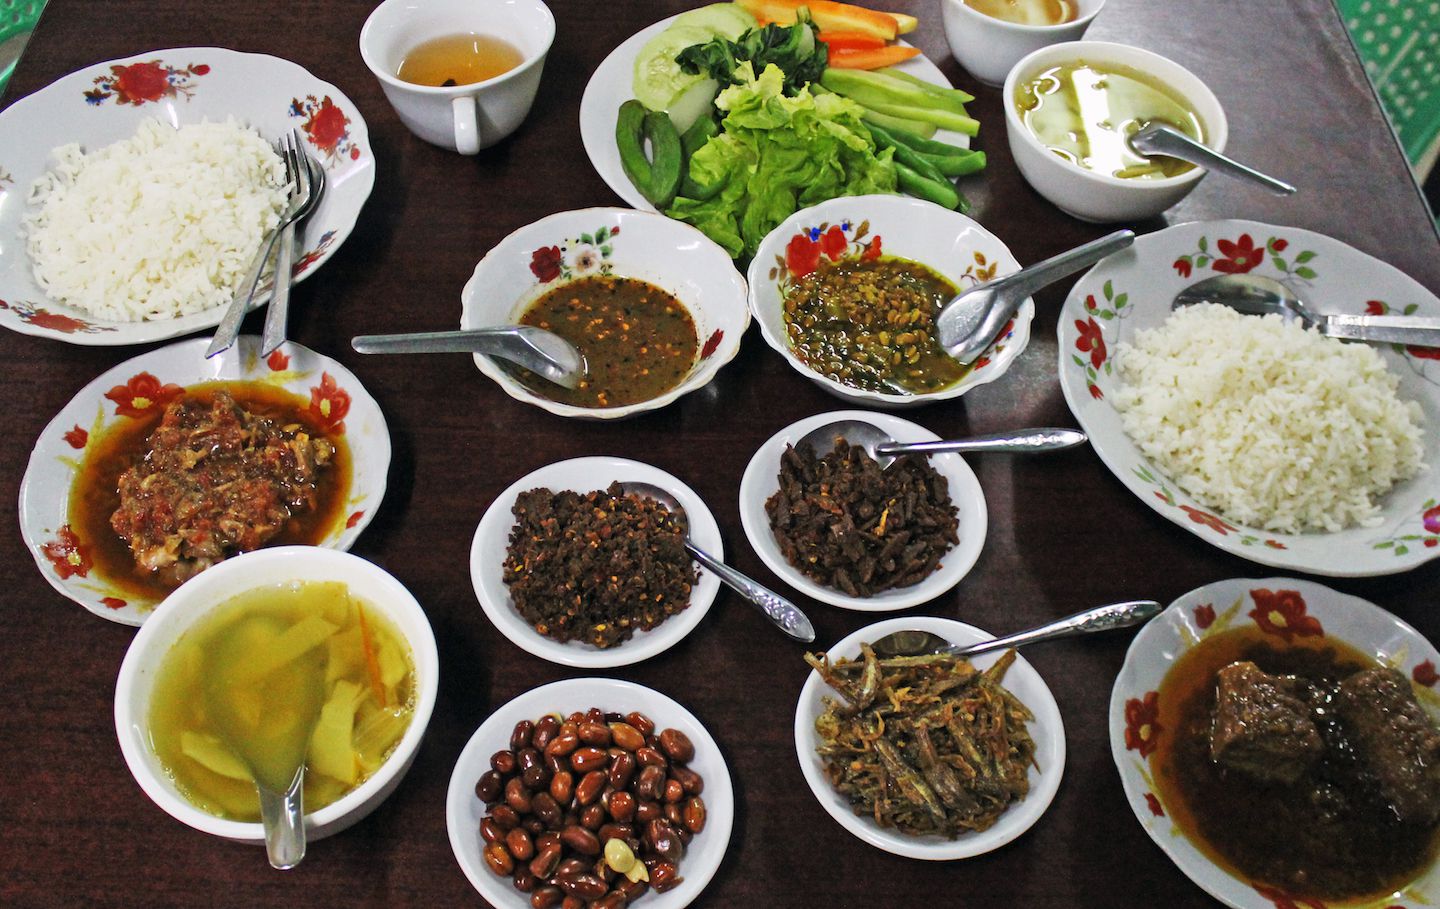 A Myanmar Rice Meal